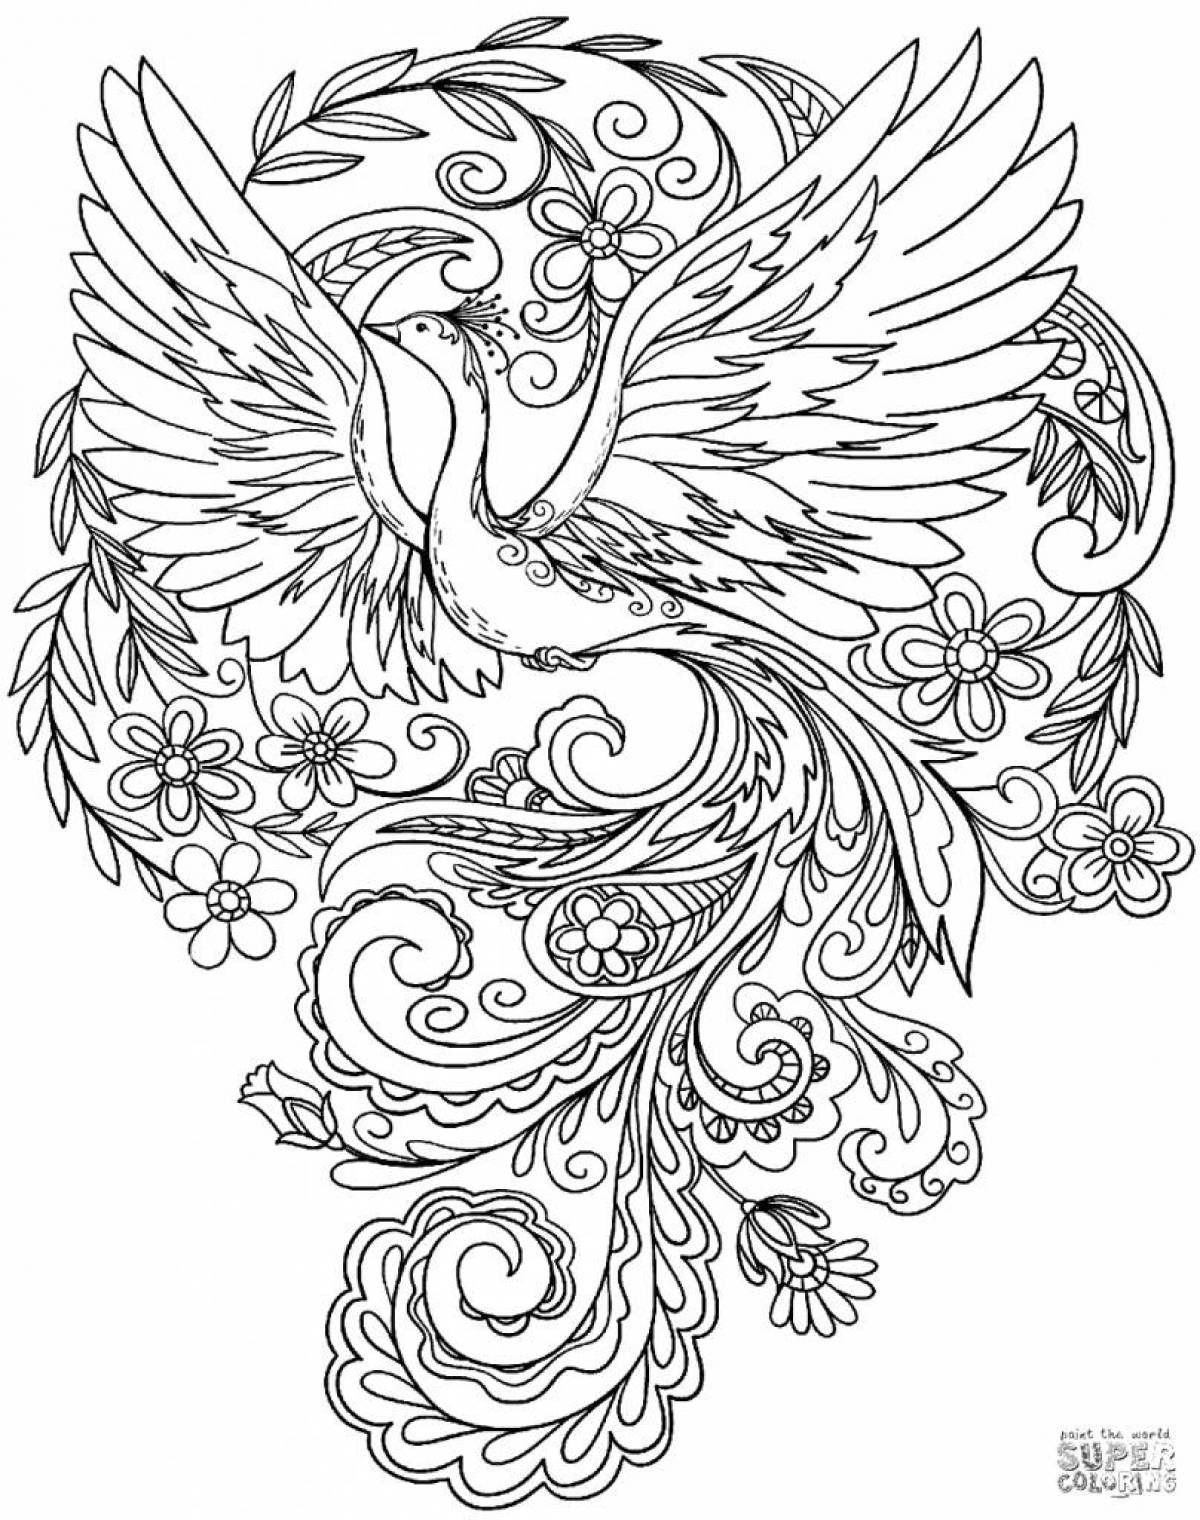 Playful fire bird coloring page for kids